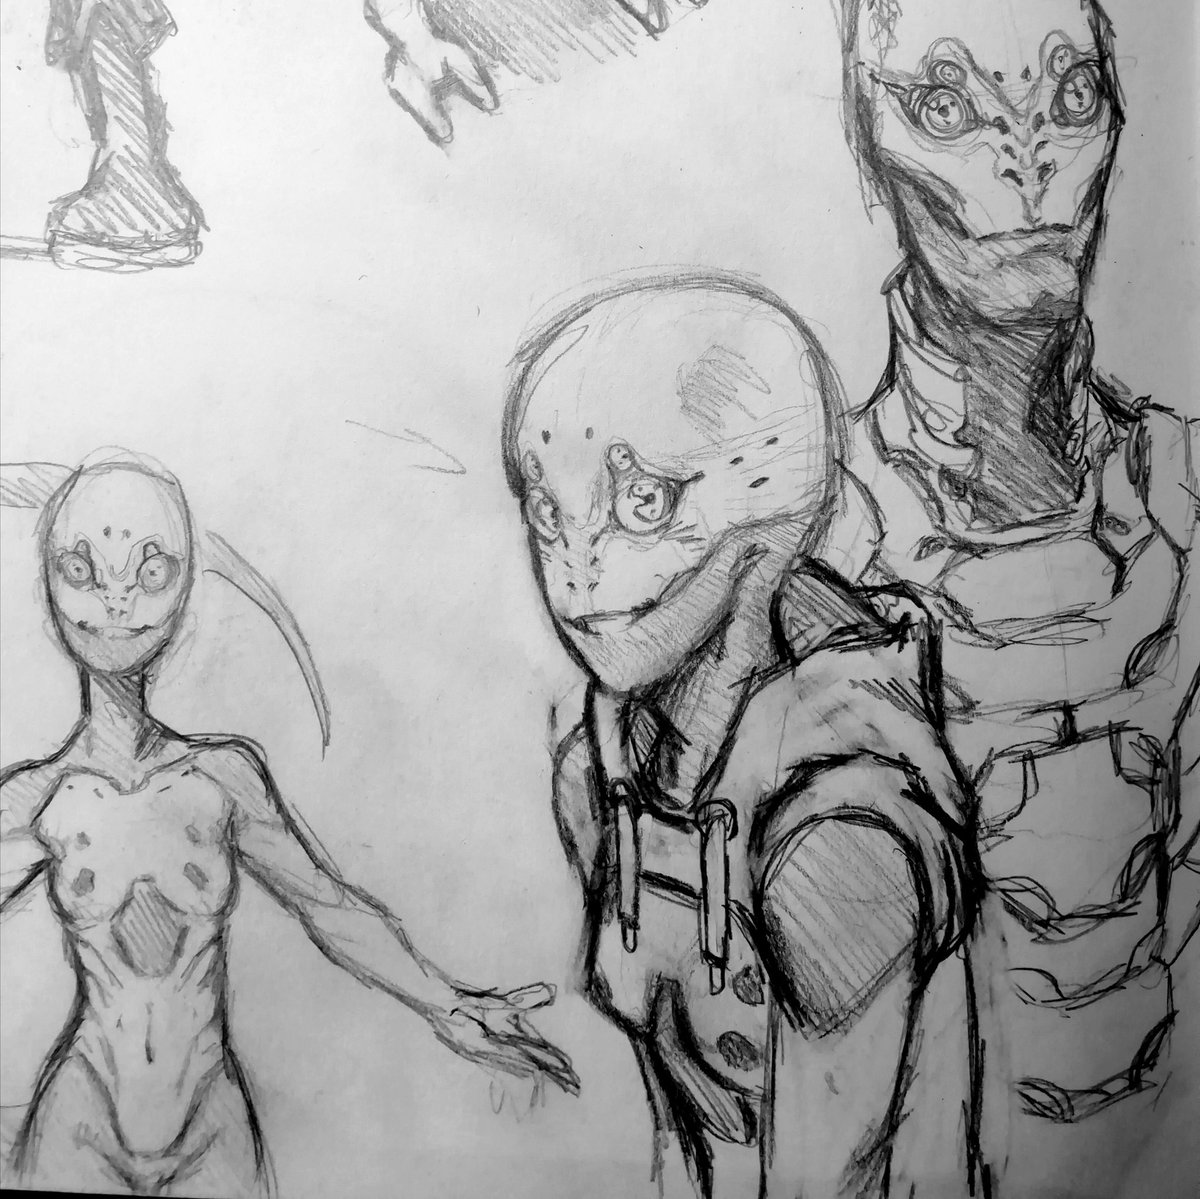 Some sci-fi things
#scifi
#sketches 